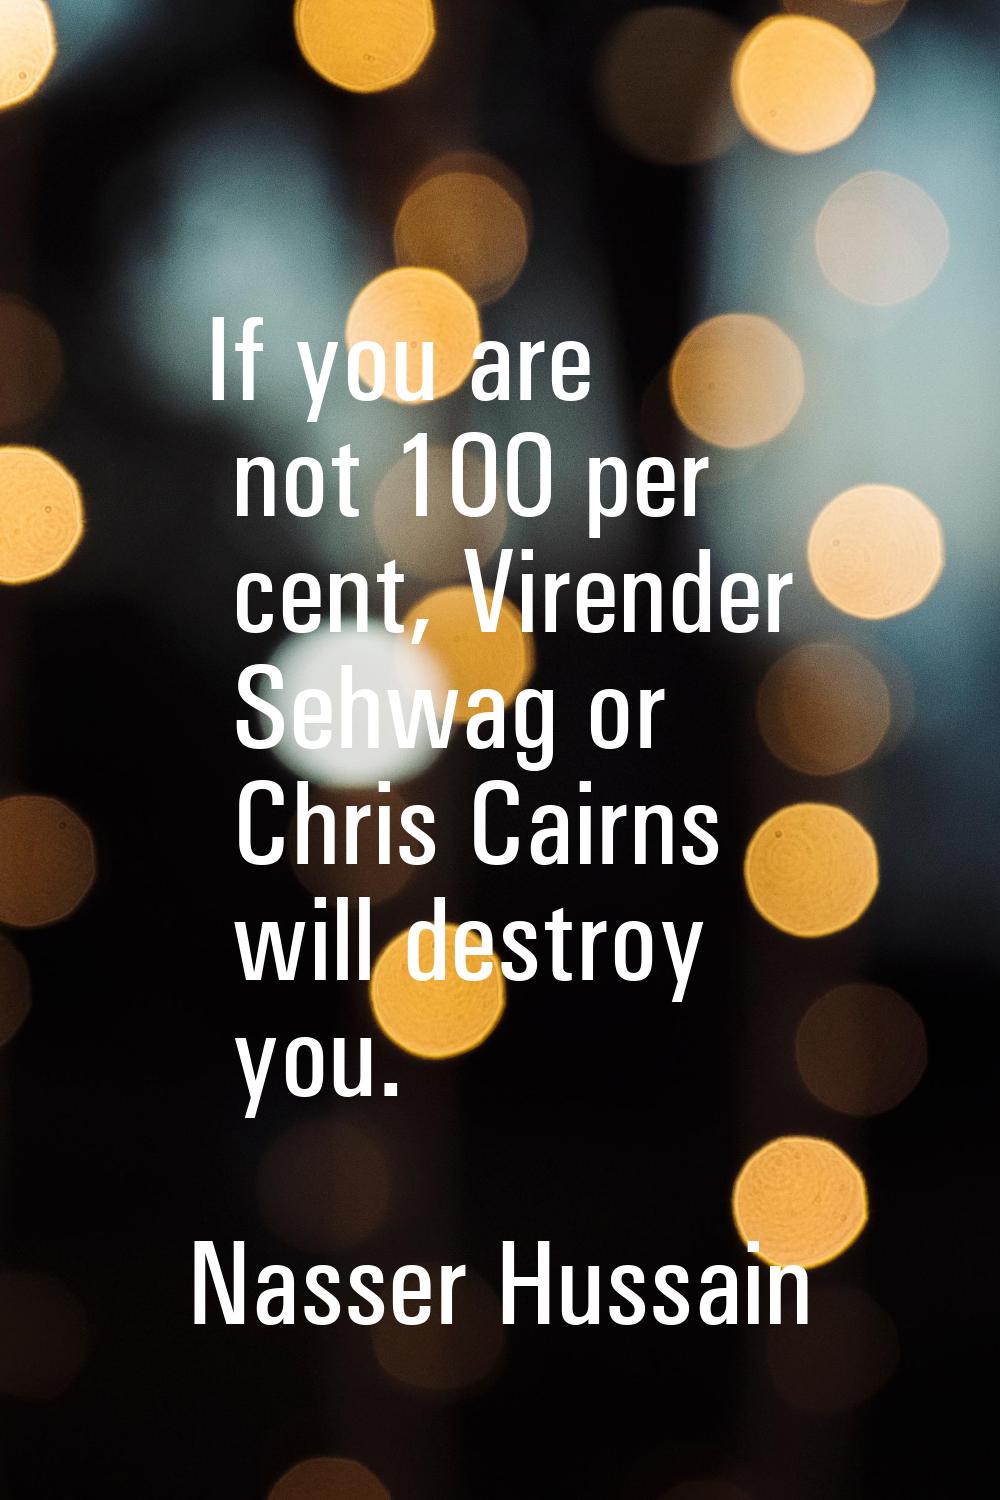 If you are not 100 per cent, Virender Sehwag or Chris Cairns will destroy you.